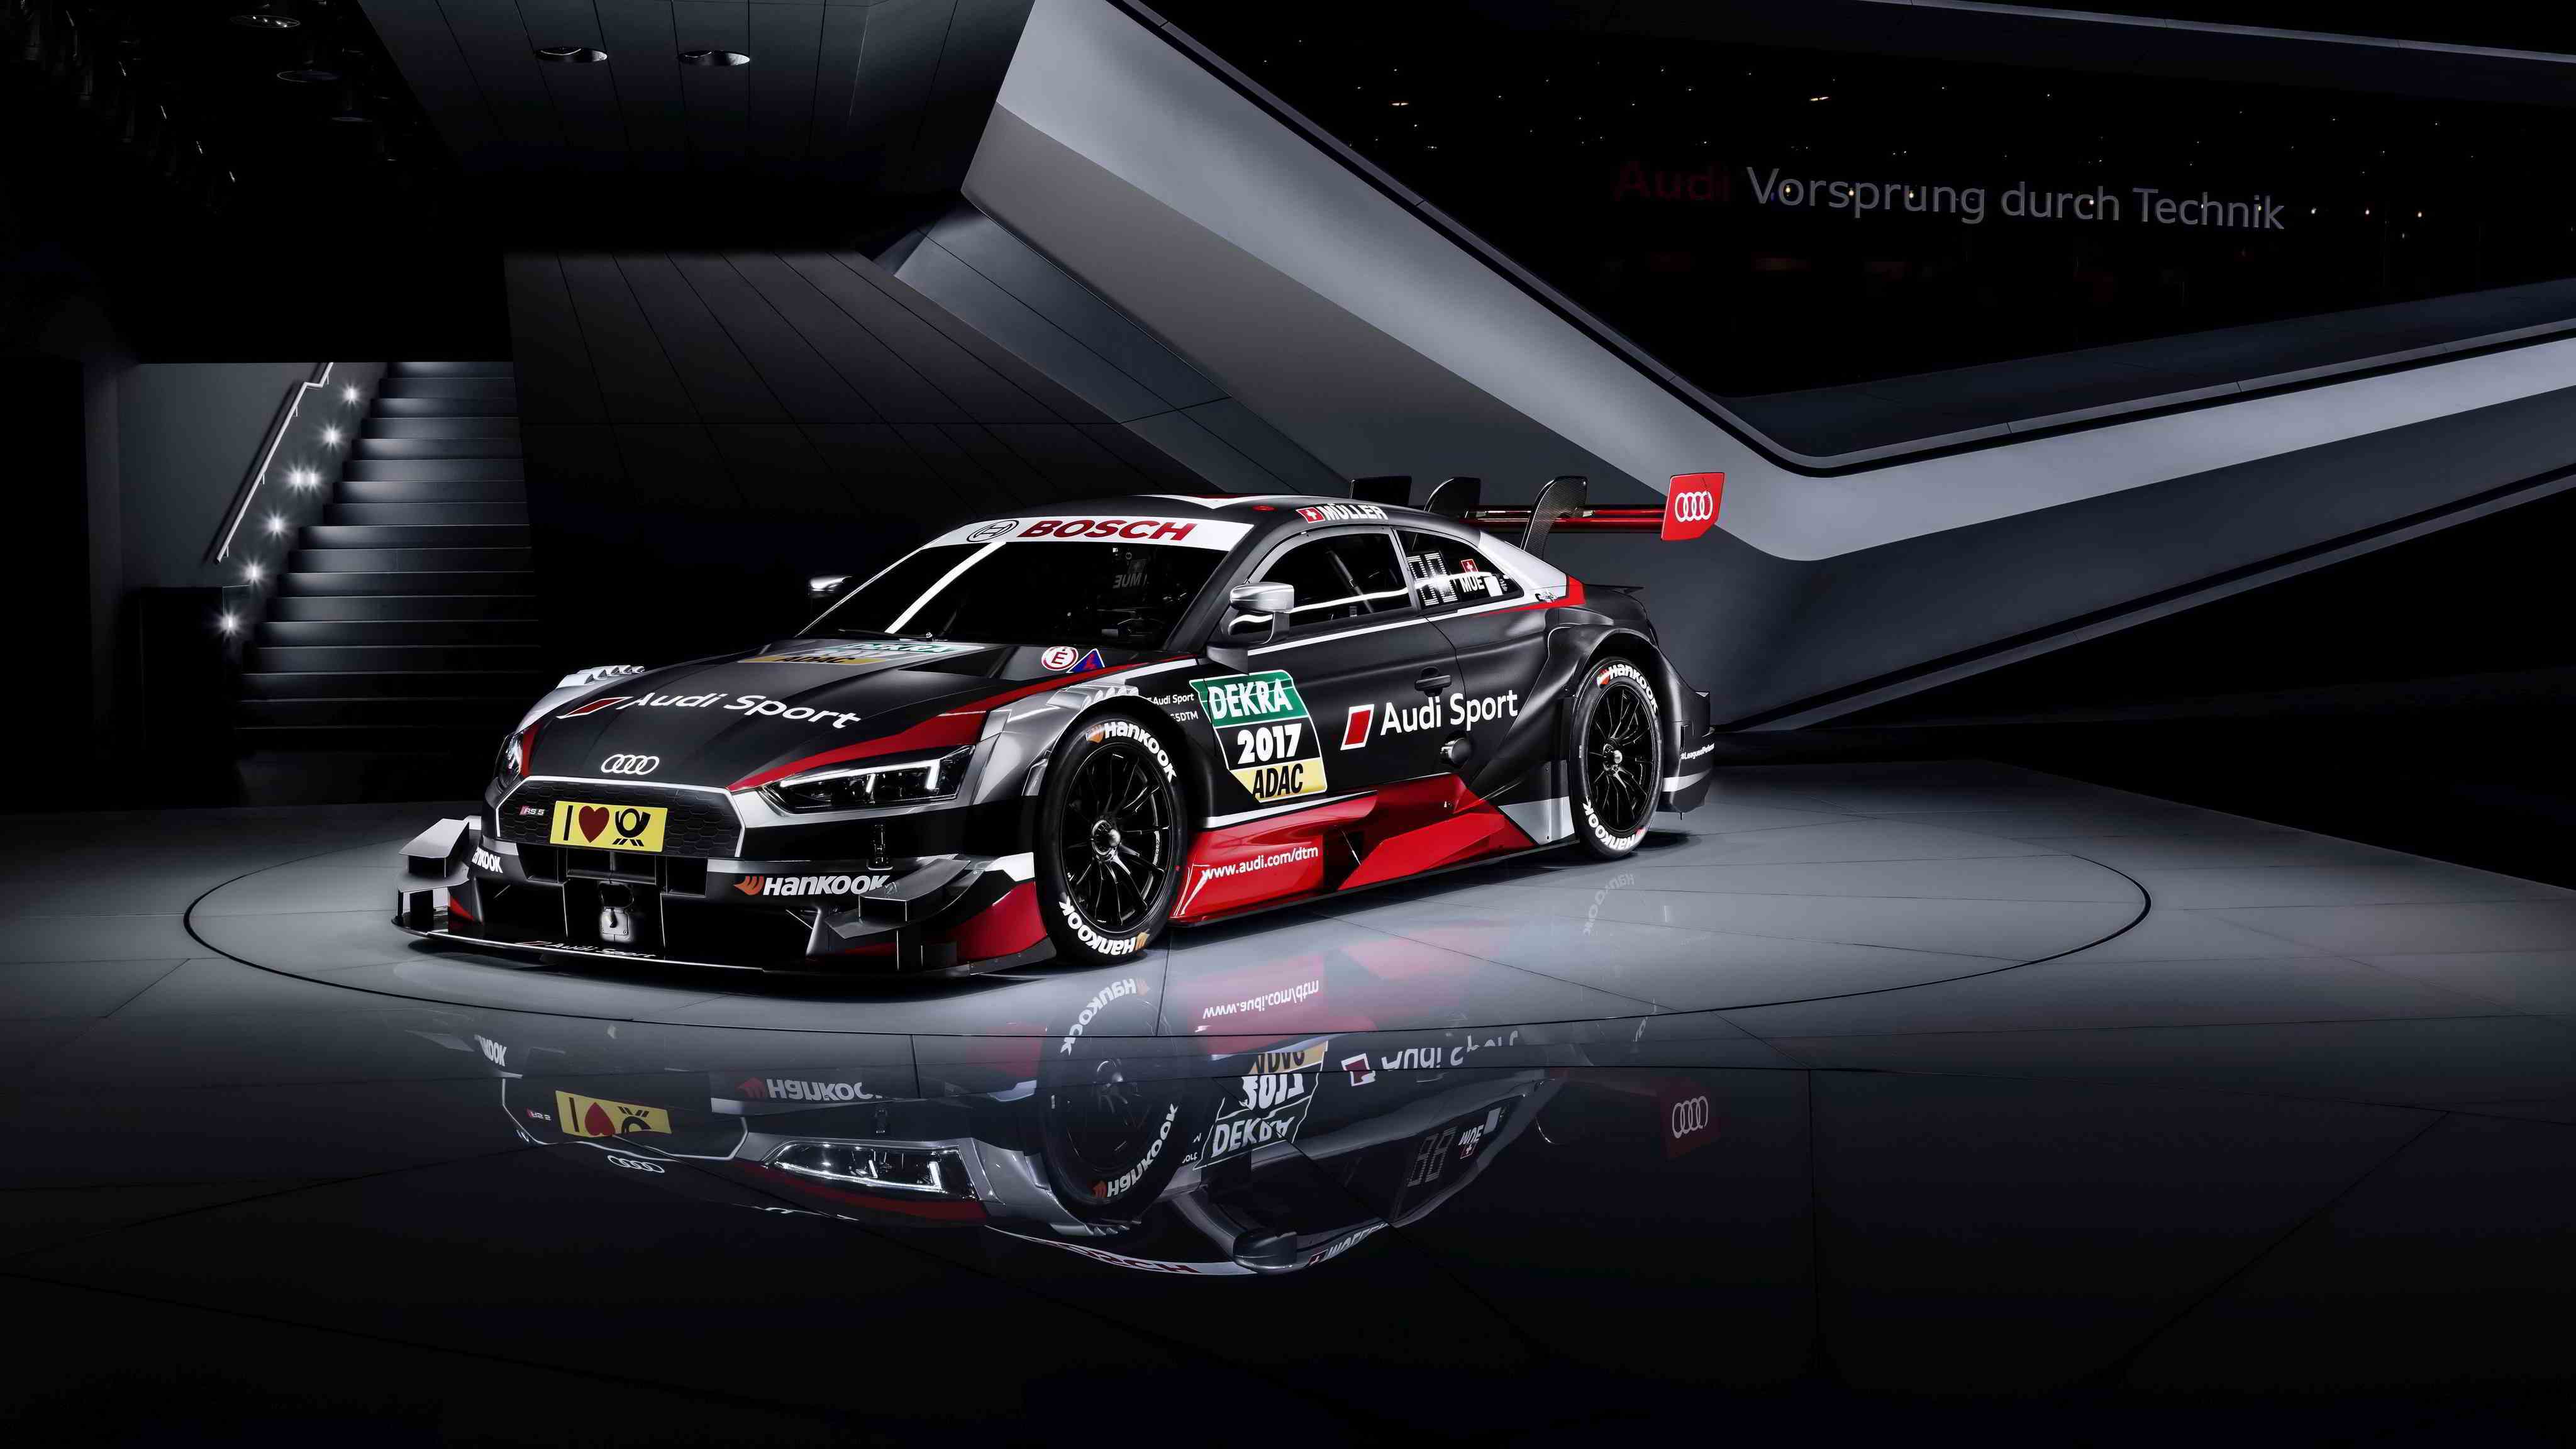 46 Full Hd Cool Car Wallpapers That Look Amazing Free - Audi Rs5 Dtm 2017 , HD Wallpaper & Backgrounds